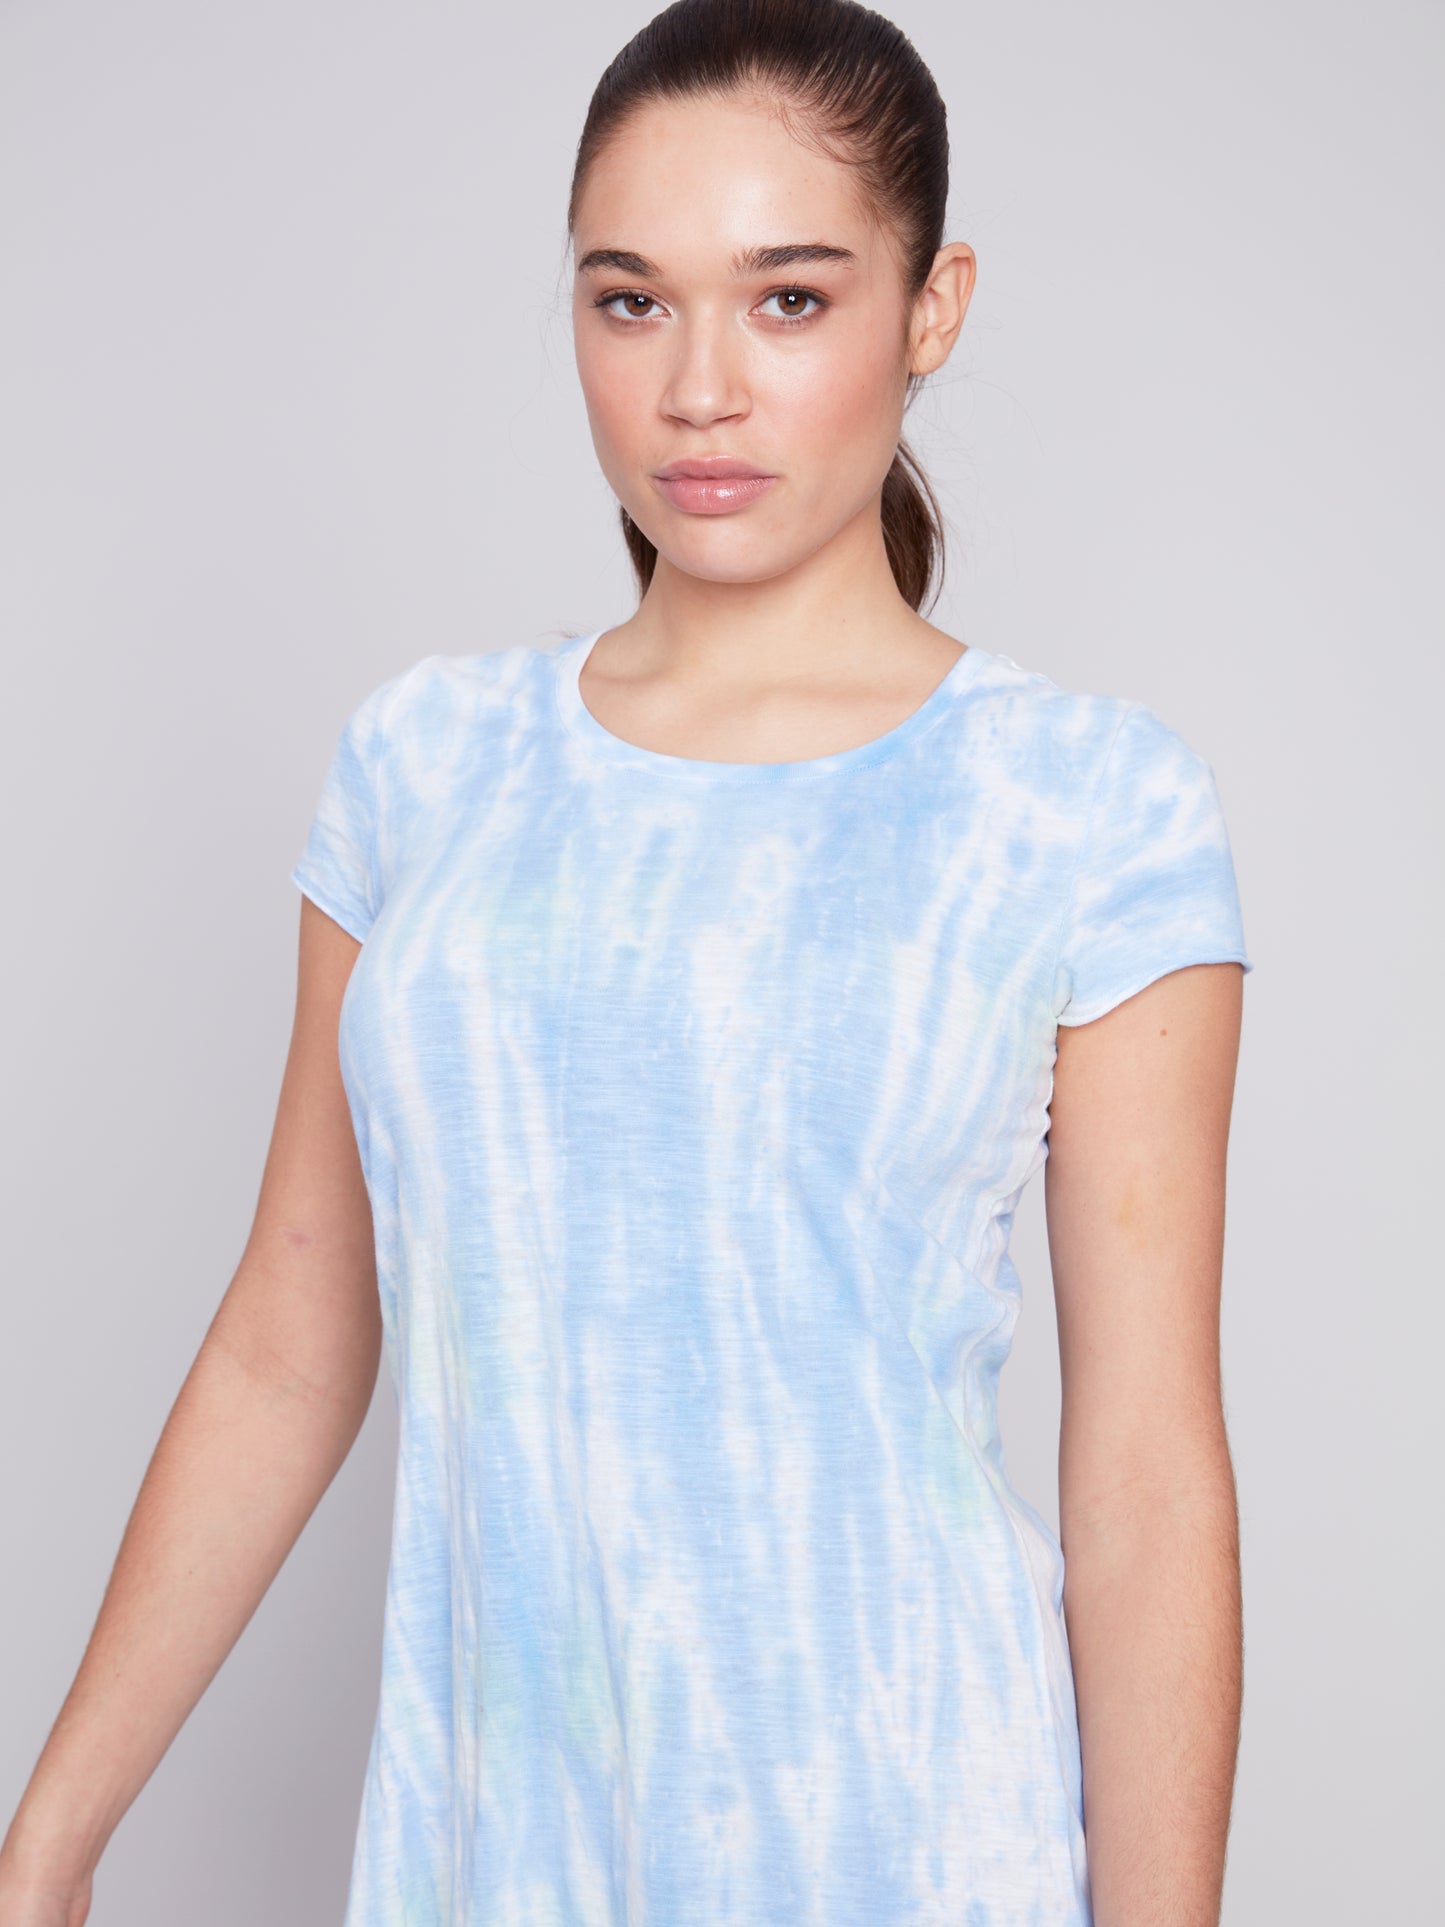 A woman wearing a Charlie B Ocean Wind Short Sleeve Dress, a high-quality fabric blue and white tie-dye summer dress with short sleeves, standing in a neutral pose against a grey background.